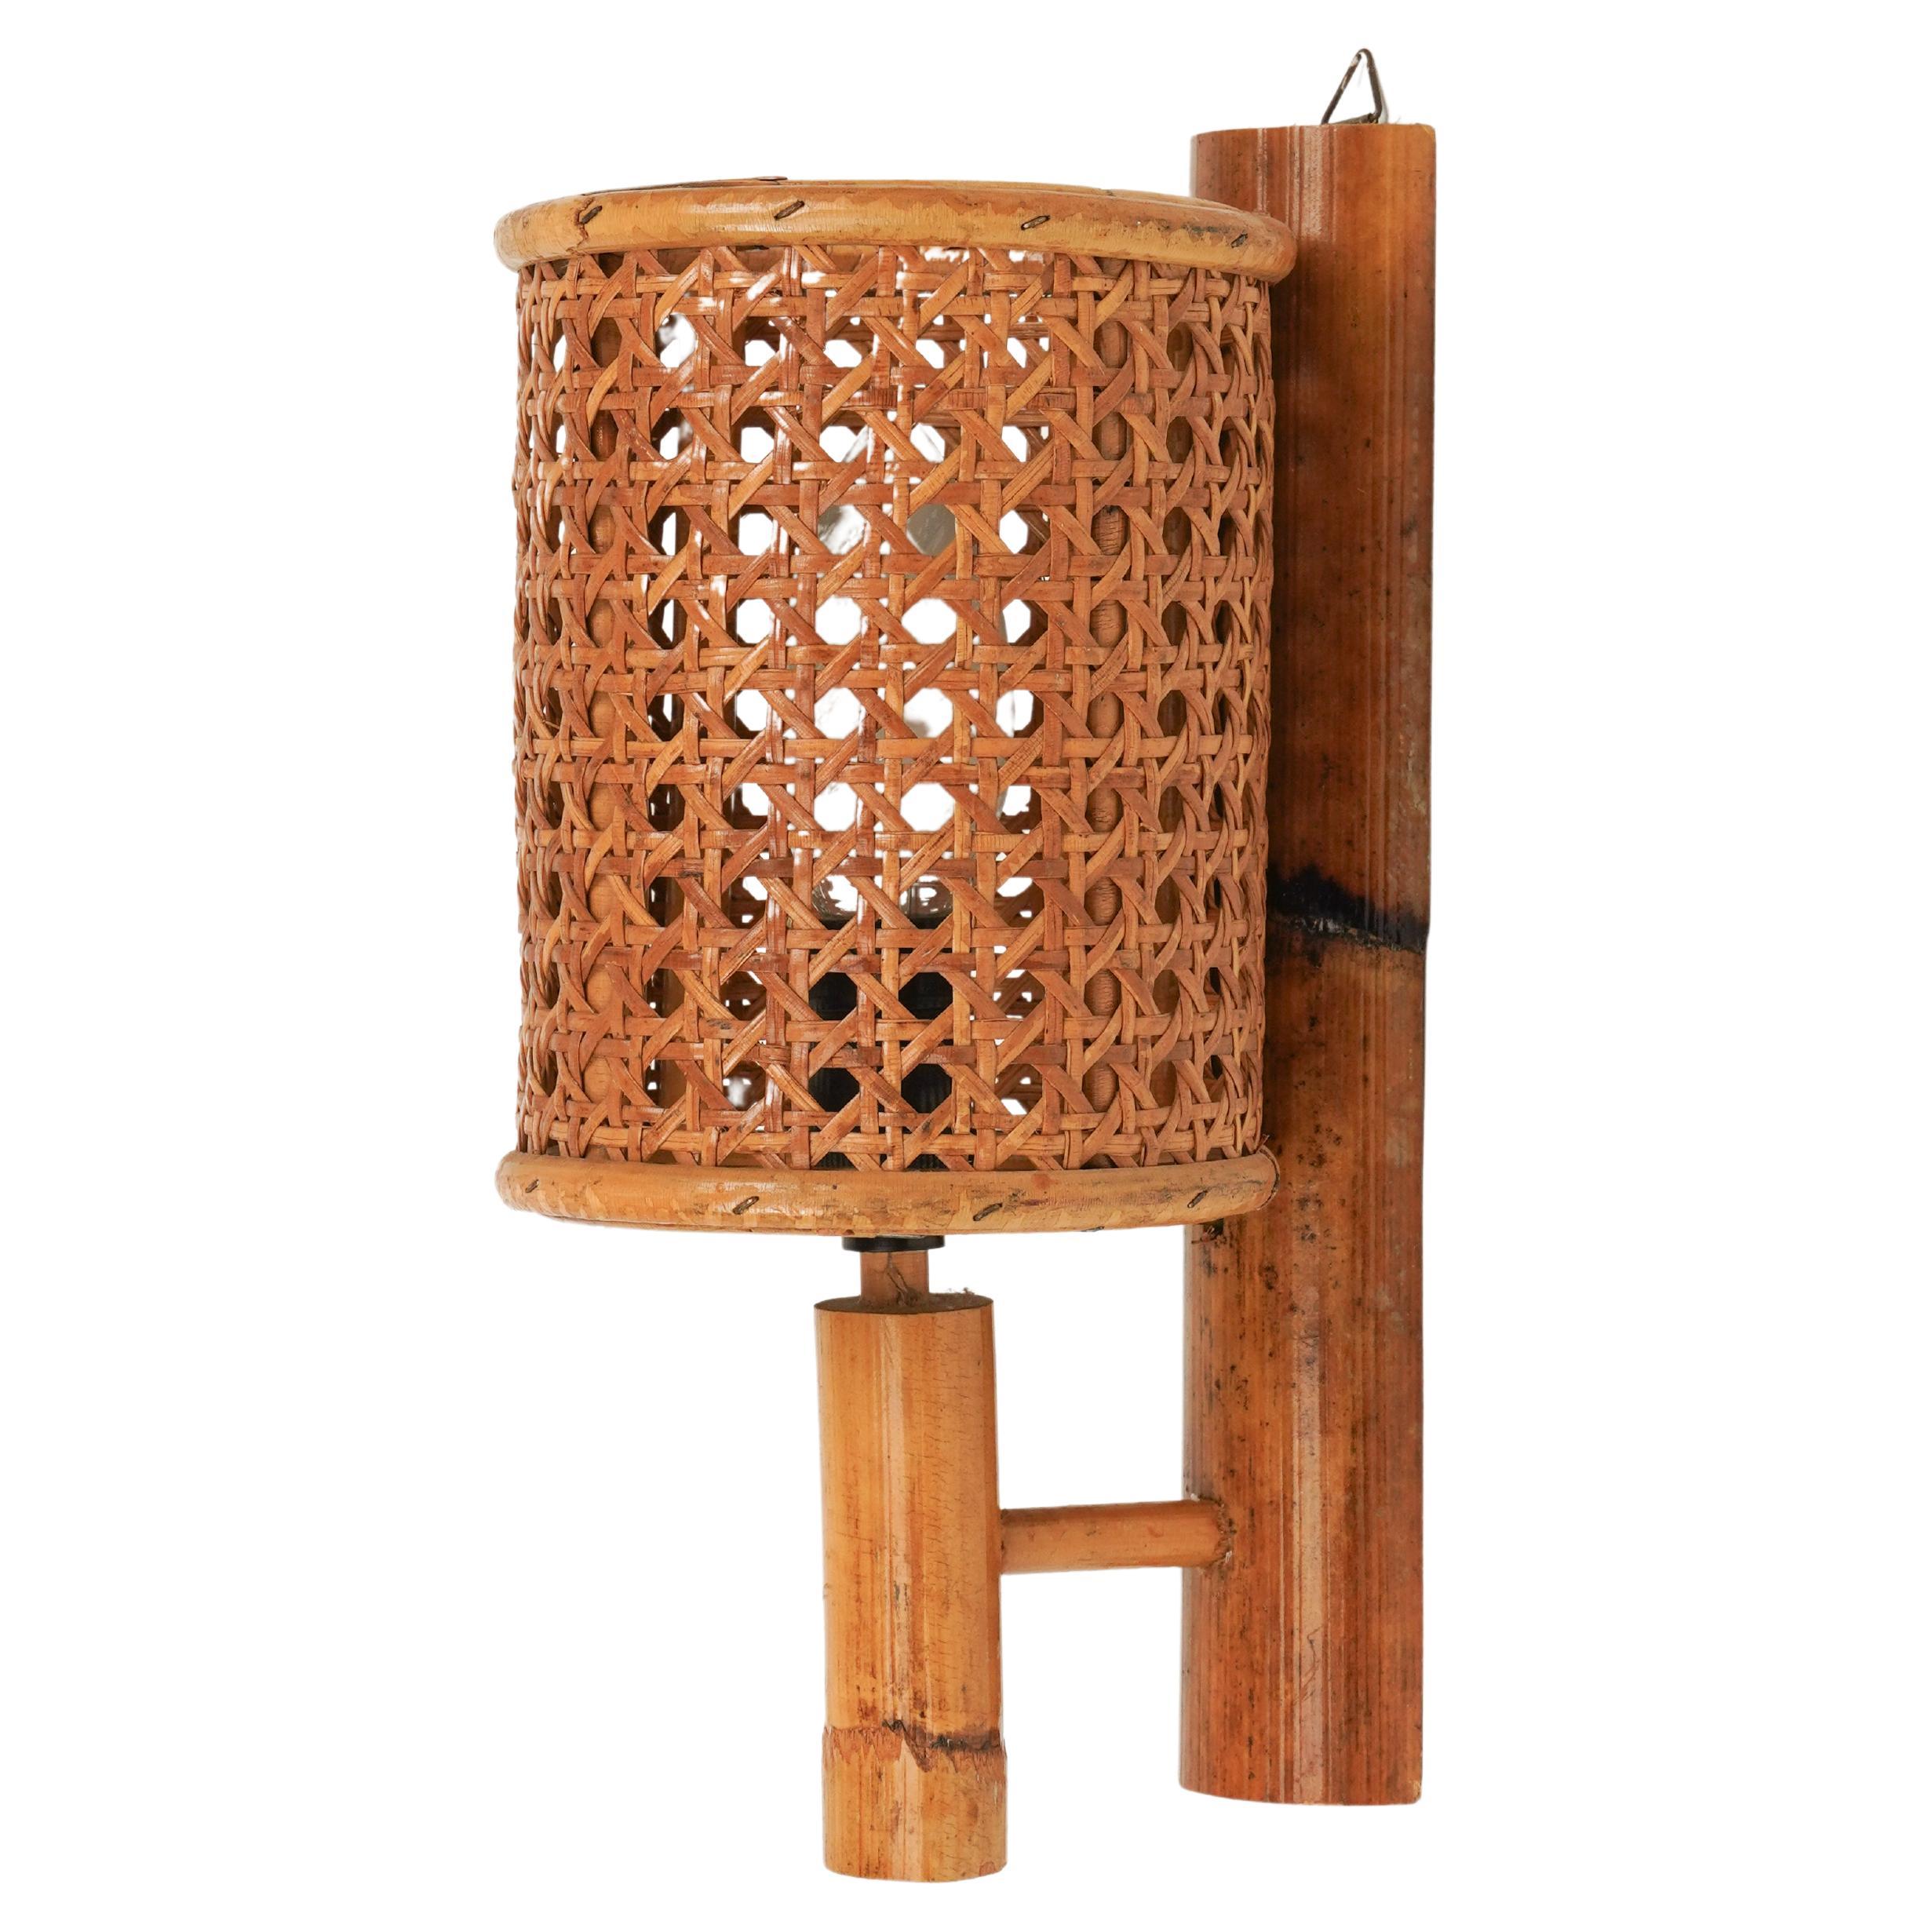 Sconce "Lantern" Wall Lamp in Rattan & Bamboo Louis Sognot Style, 1960s For Sale